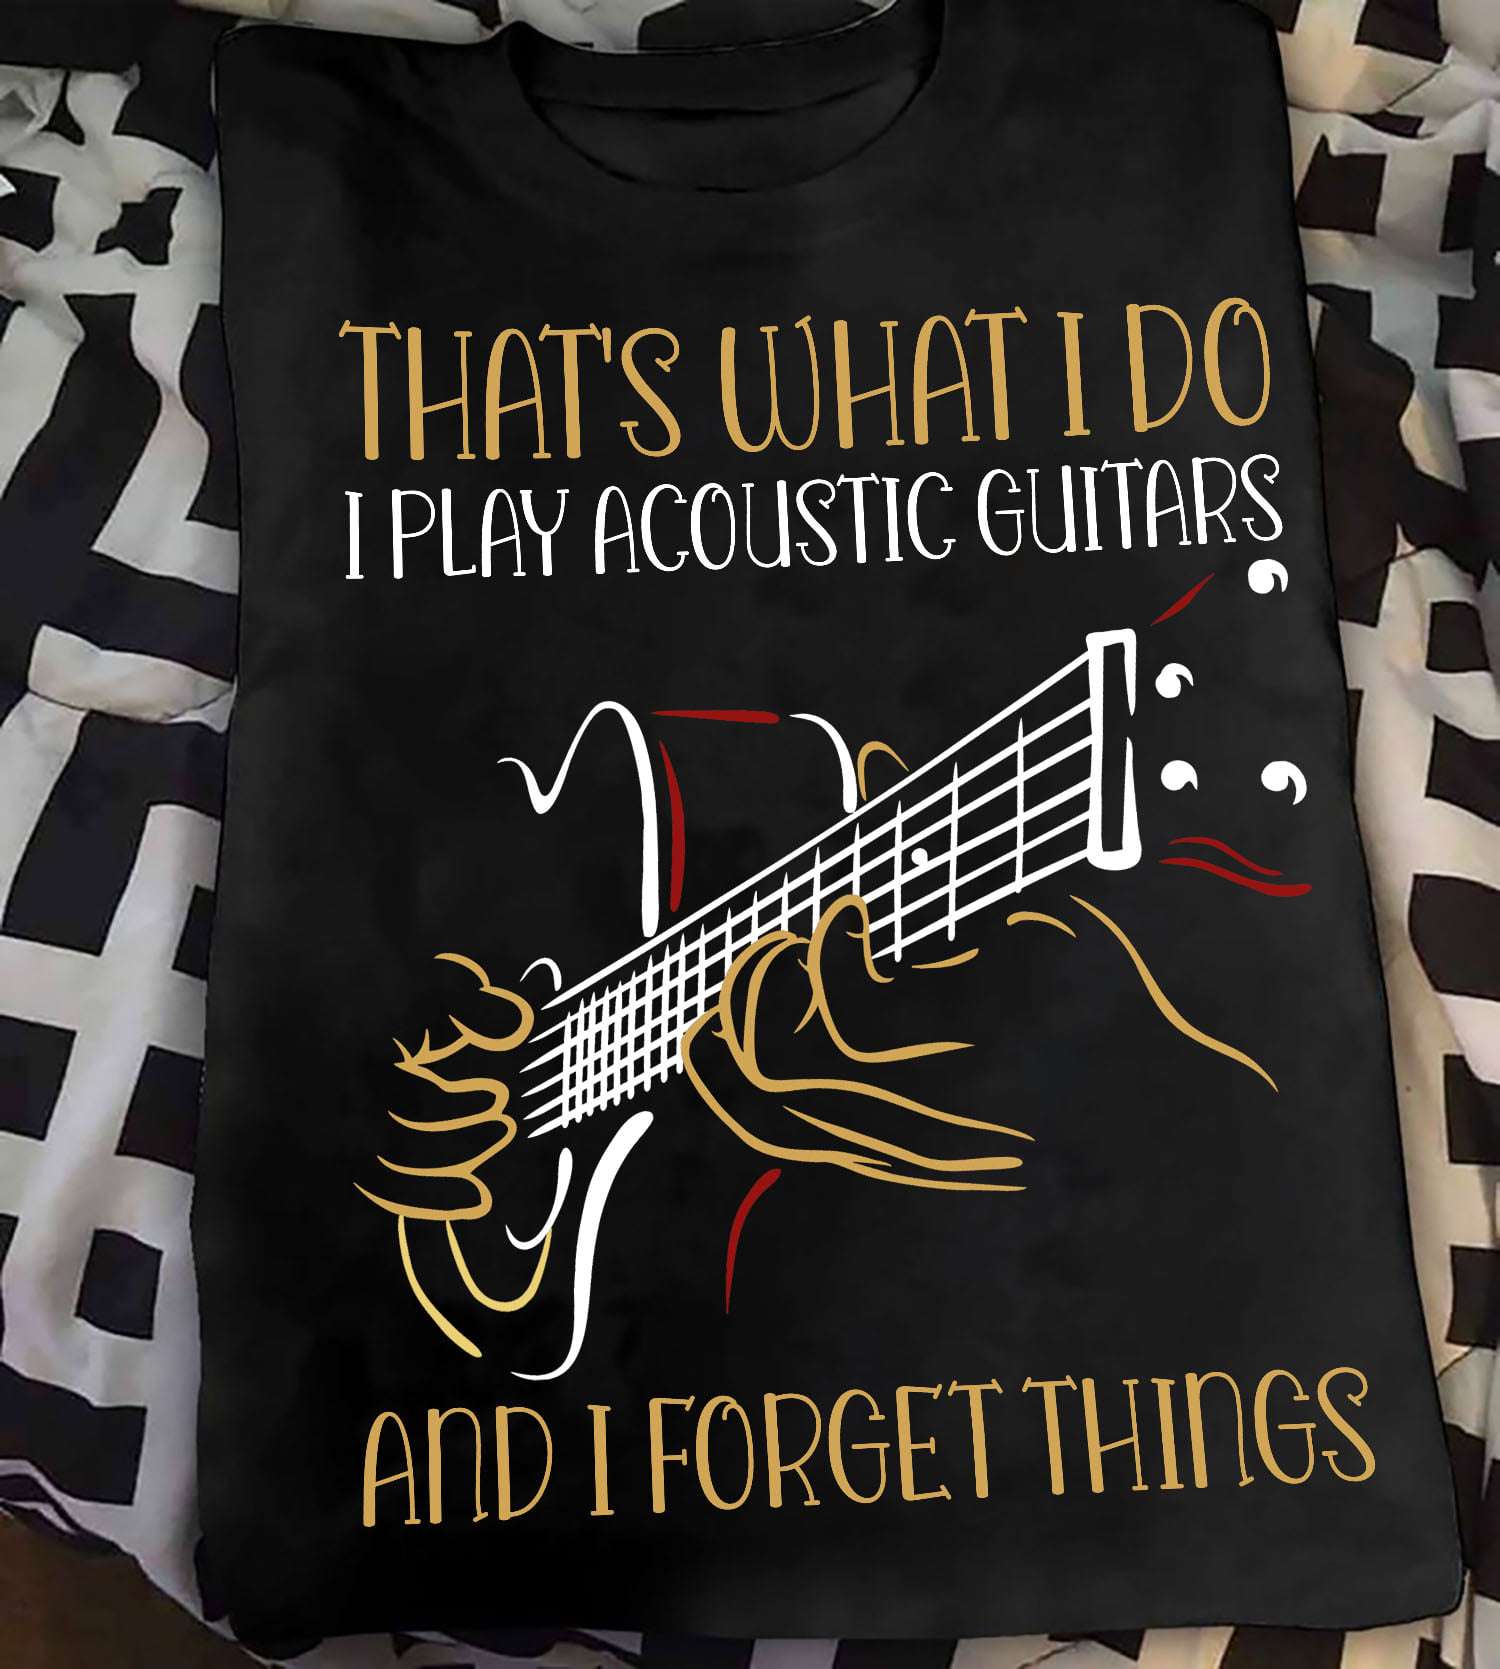 That's what I do I play acoustic guitars and I forget things - Acoustis guitarist